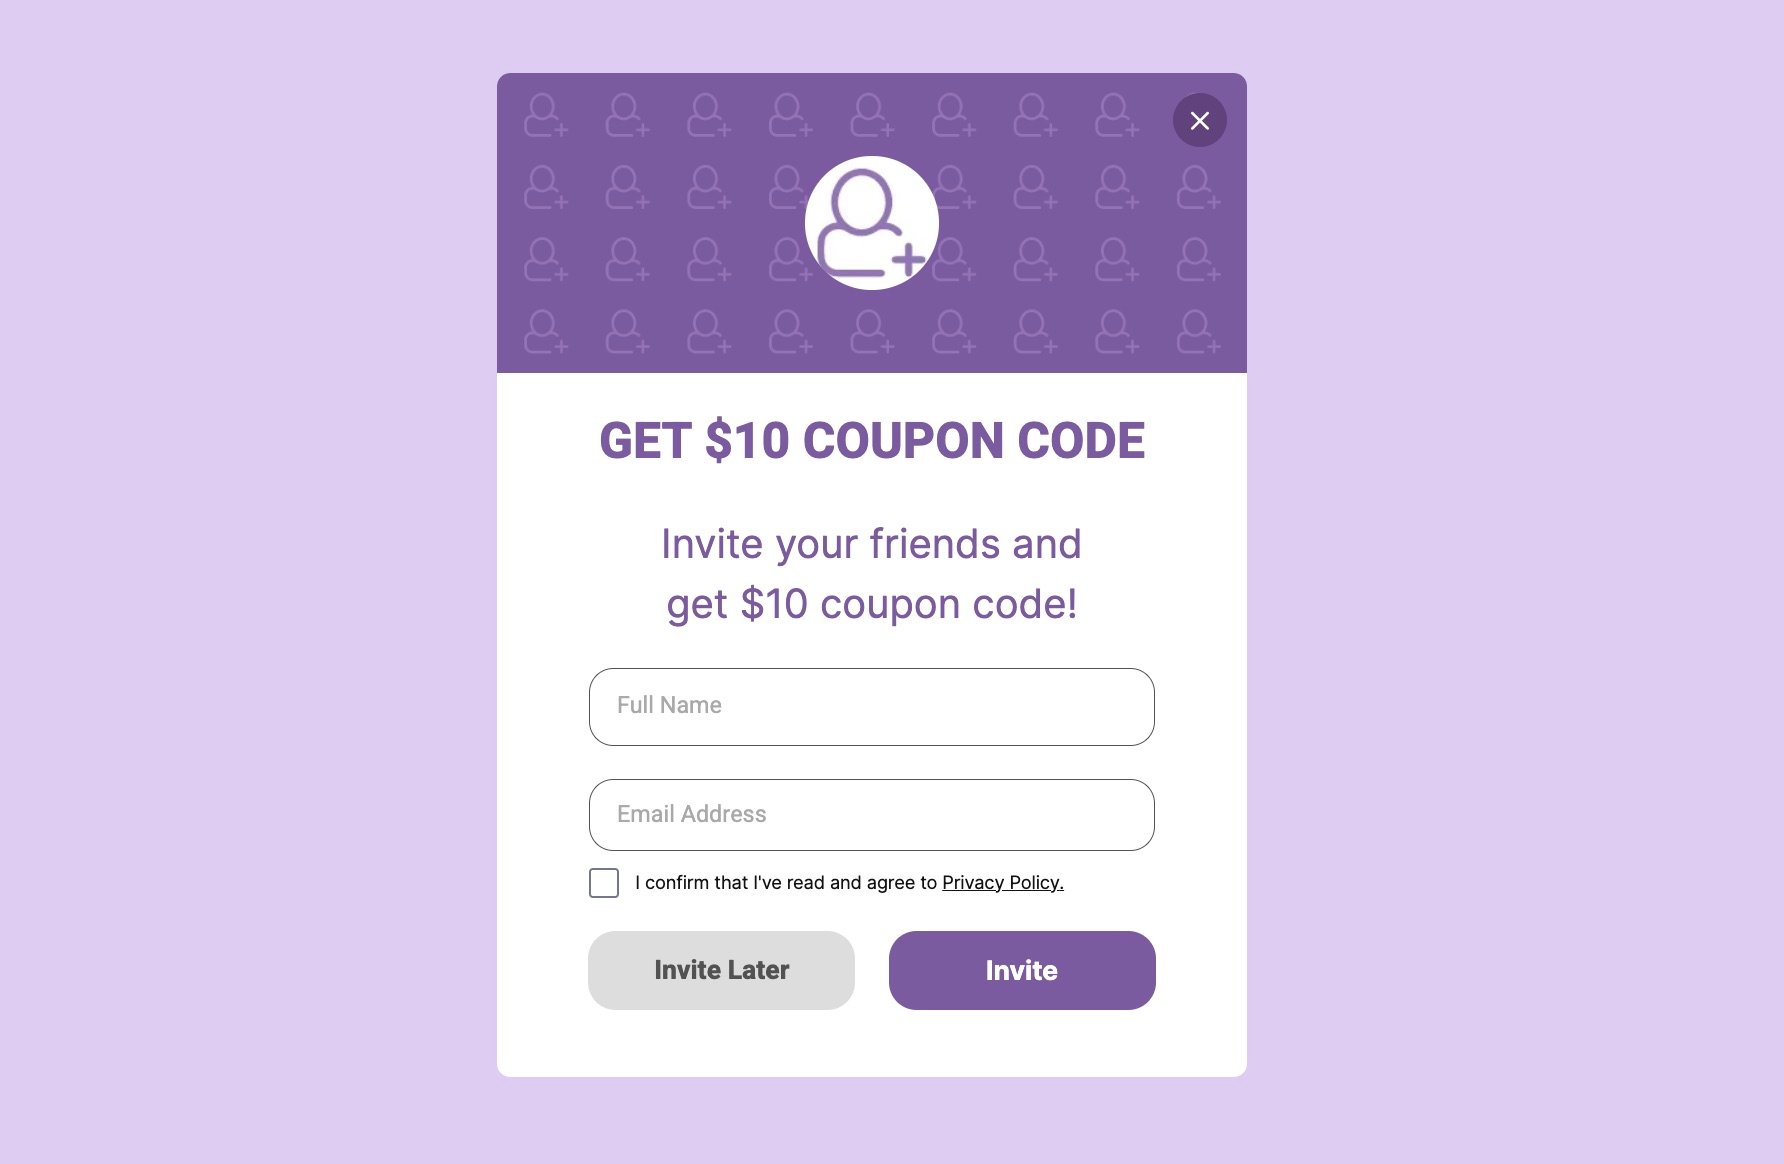 https://popupsmart.com/blog/user/pages/387.coupon-code-ideas/customer-referral-coupon-code-popup-example.jpeg